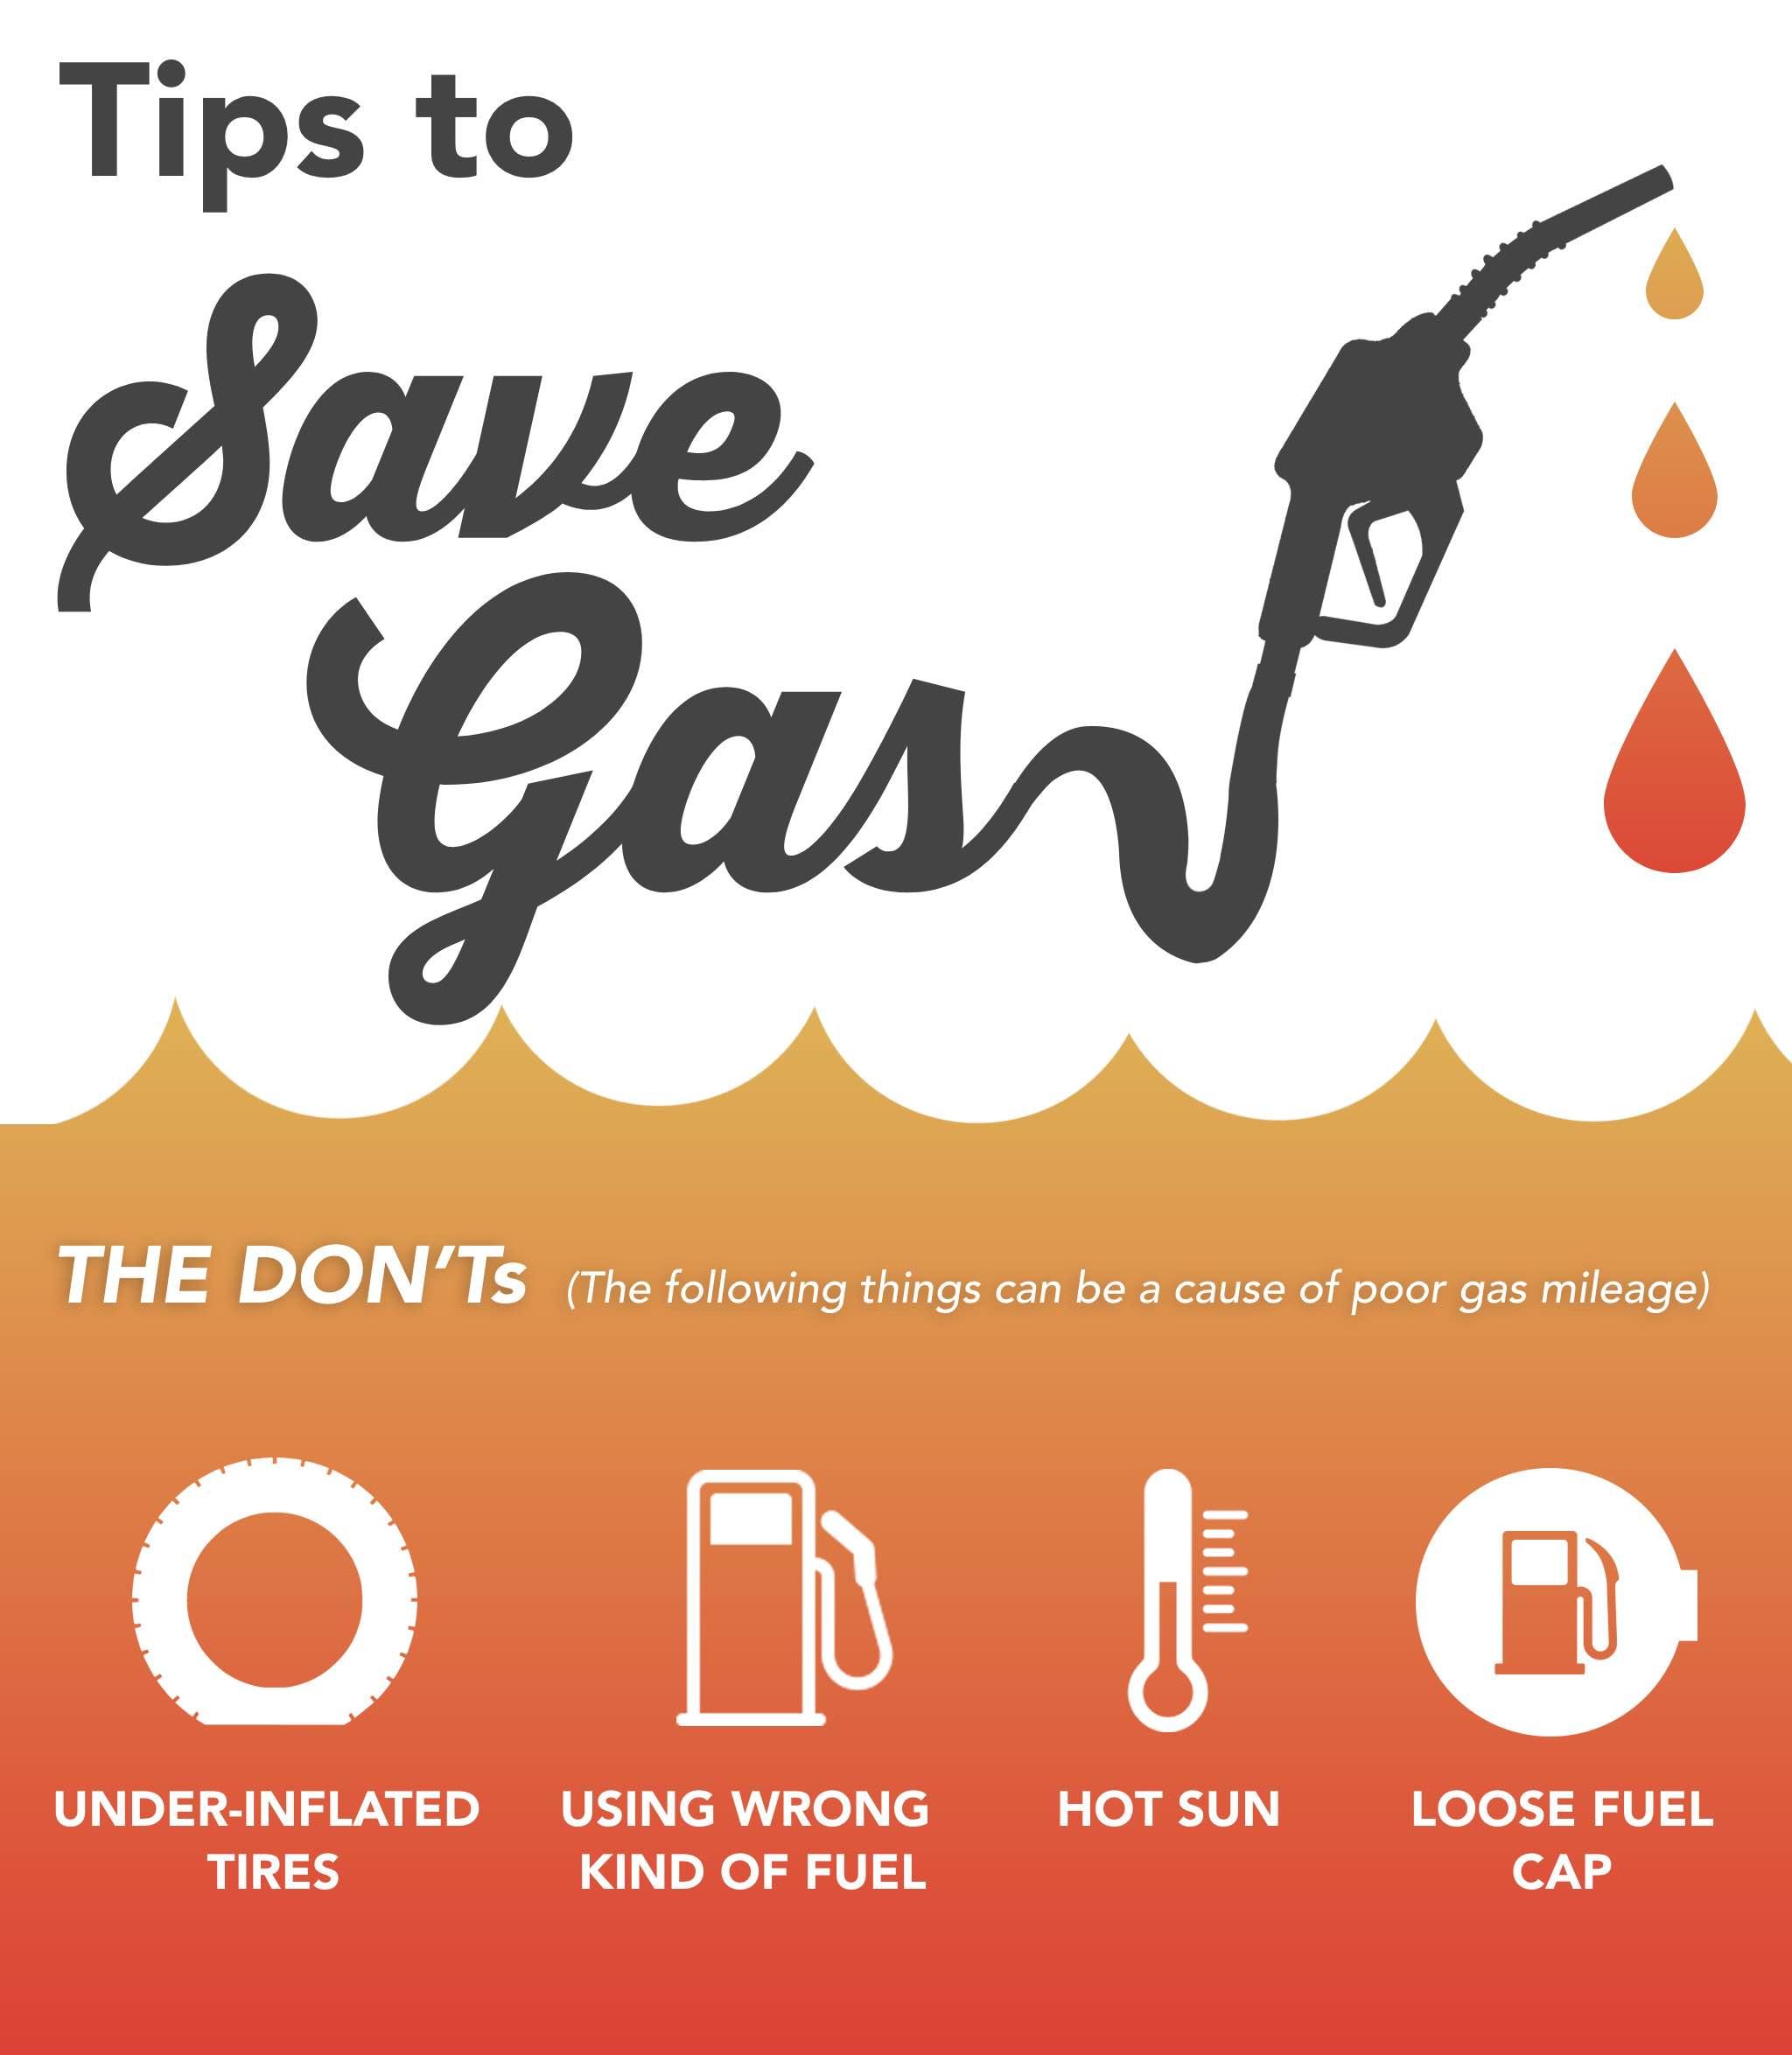 THE DON’Ts (The following things can be a cause of poor gas mileage)